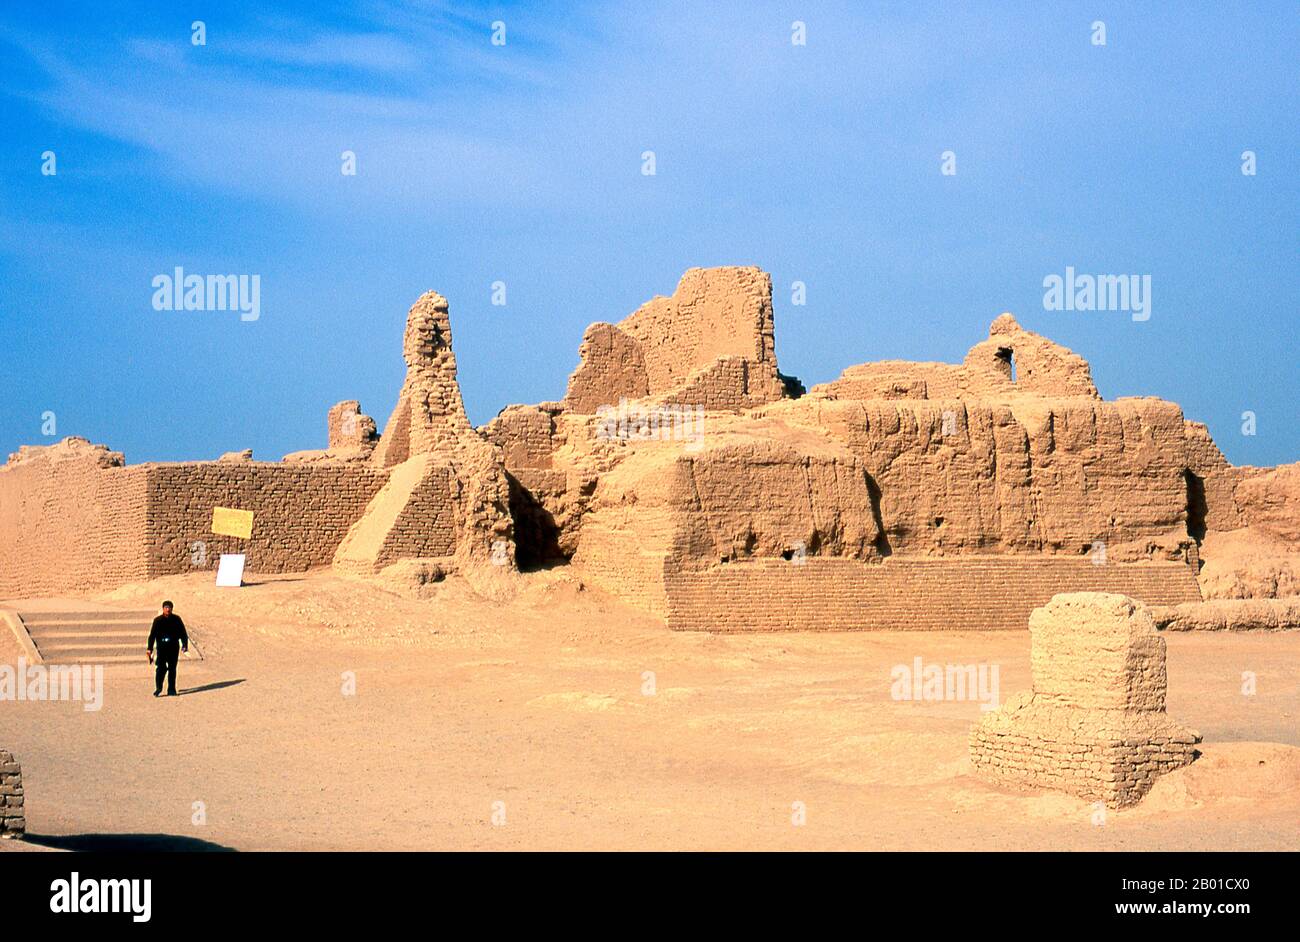 China: The ruins at Karakhoja or Gaochang Gucheng (Gaochang Ancient City), near Turpan, Xinjiang Province.  The ruins of Karakhoja or Gaochang Gucheng (Gaochang Ancient City) date from the initial Han conquest of the area in the 2nd century BCE.  Located about 46 km southeast of Turpan on the edge of the Lop Desert, Karakhoja is larger than Yarkhoto, but rather less well preserved. Originally established as a garrison town, it developed into a prosperous city by Tang times, but was eventually abandoned in the 14th century, probably due to a combination of endemic warfare and desertification. Stock Photo